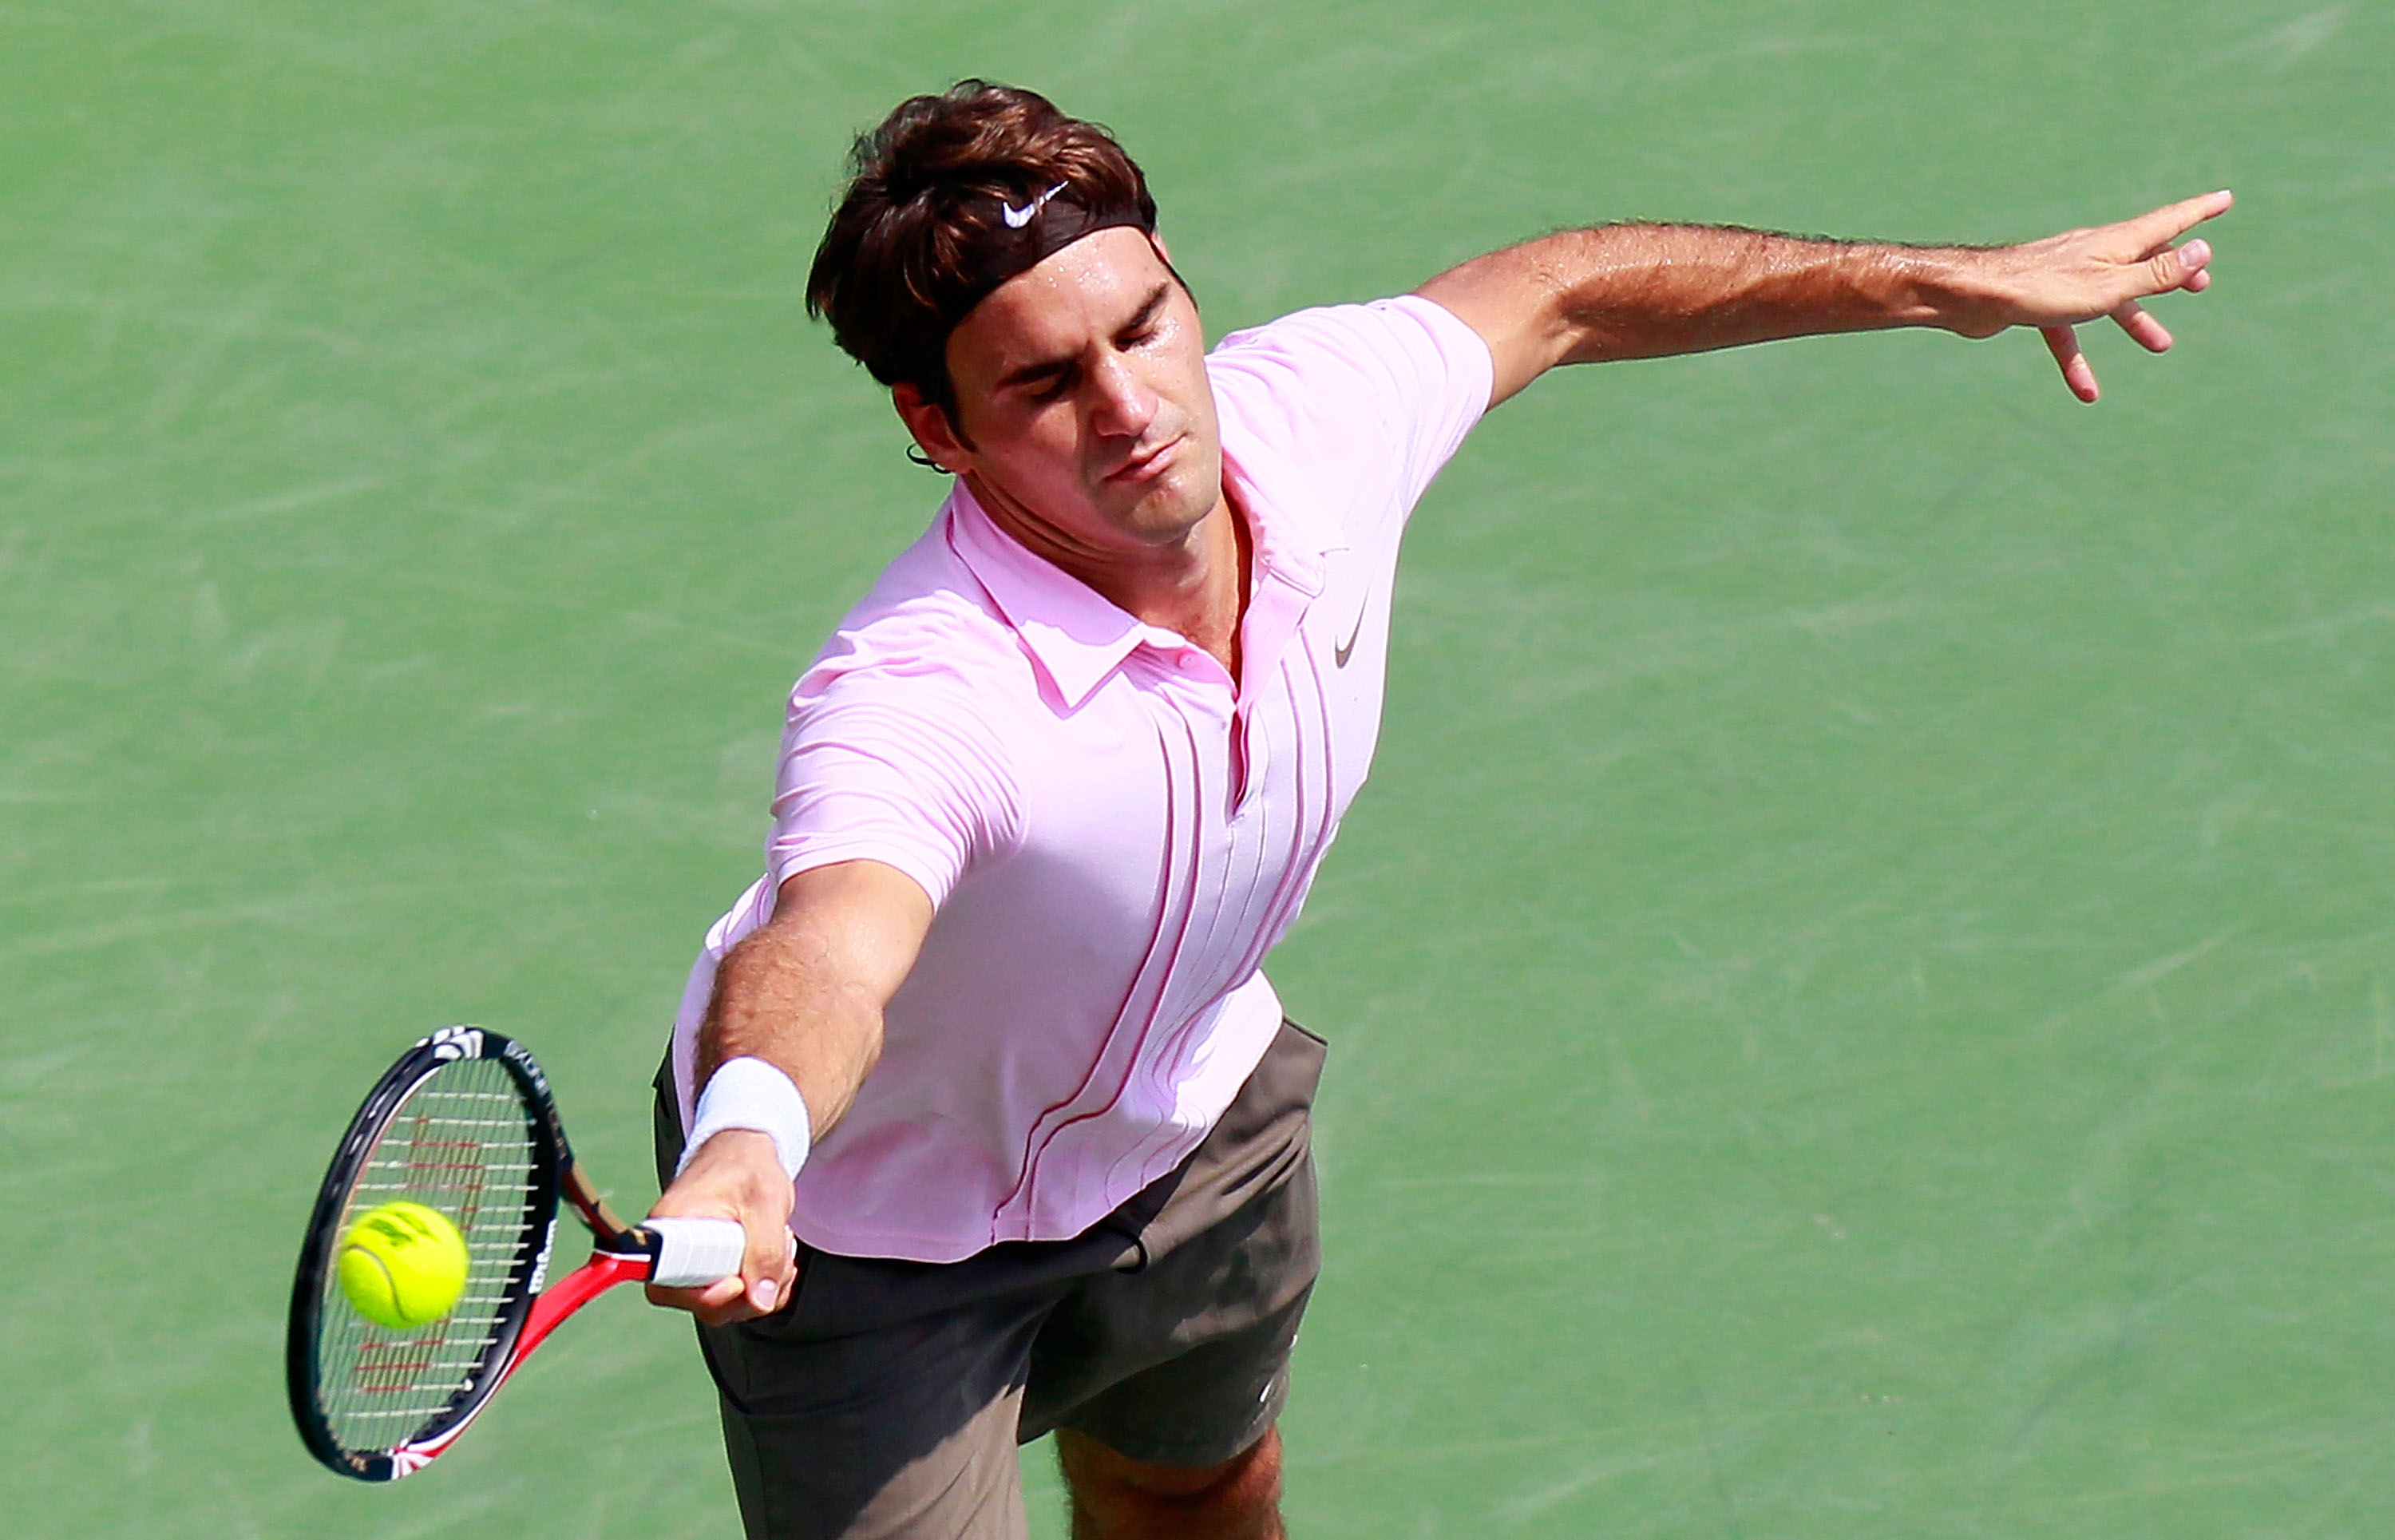 Federer may have won in Cincinnati last week, but the one he needs to worry about is coming.